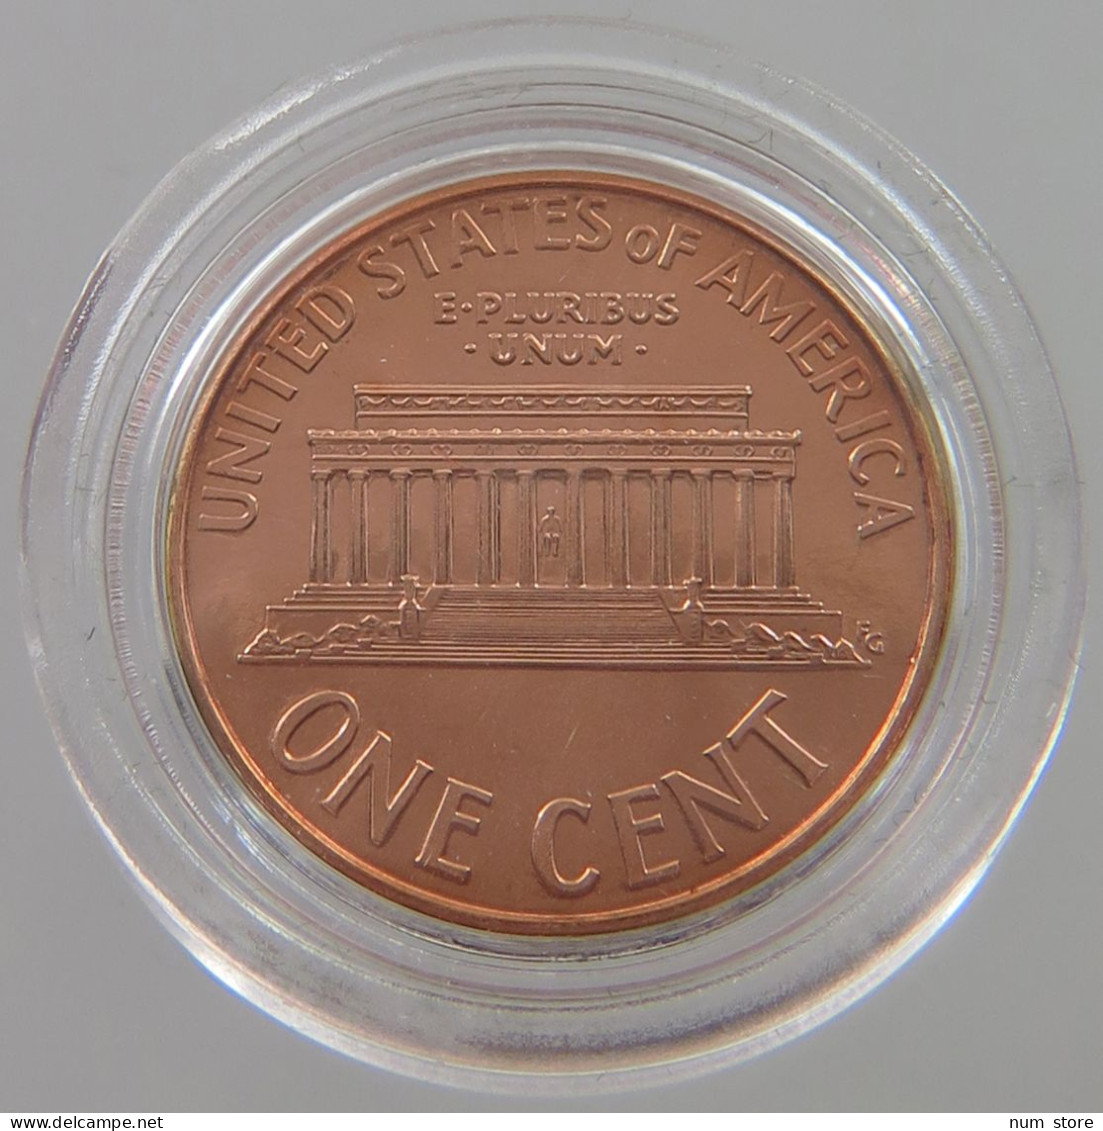 UNITED STATES OF AMERICA CENT 1999 D LINCOLN MEMORIAL #alb024 0075 - 1959-…: Lincoln, Memorial Reverse